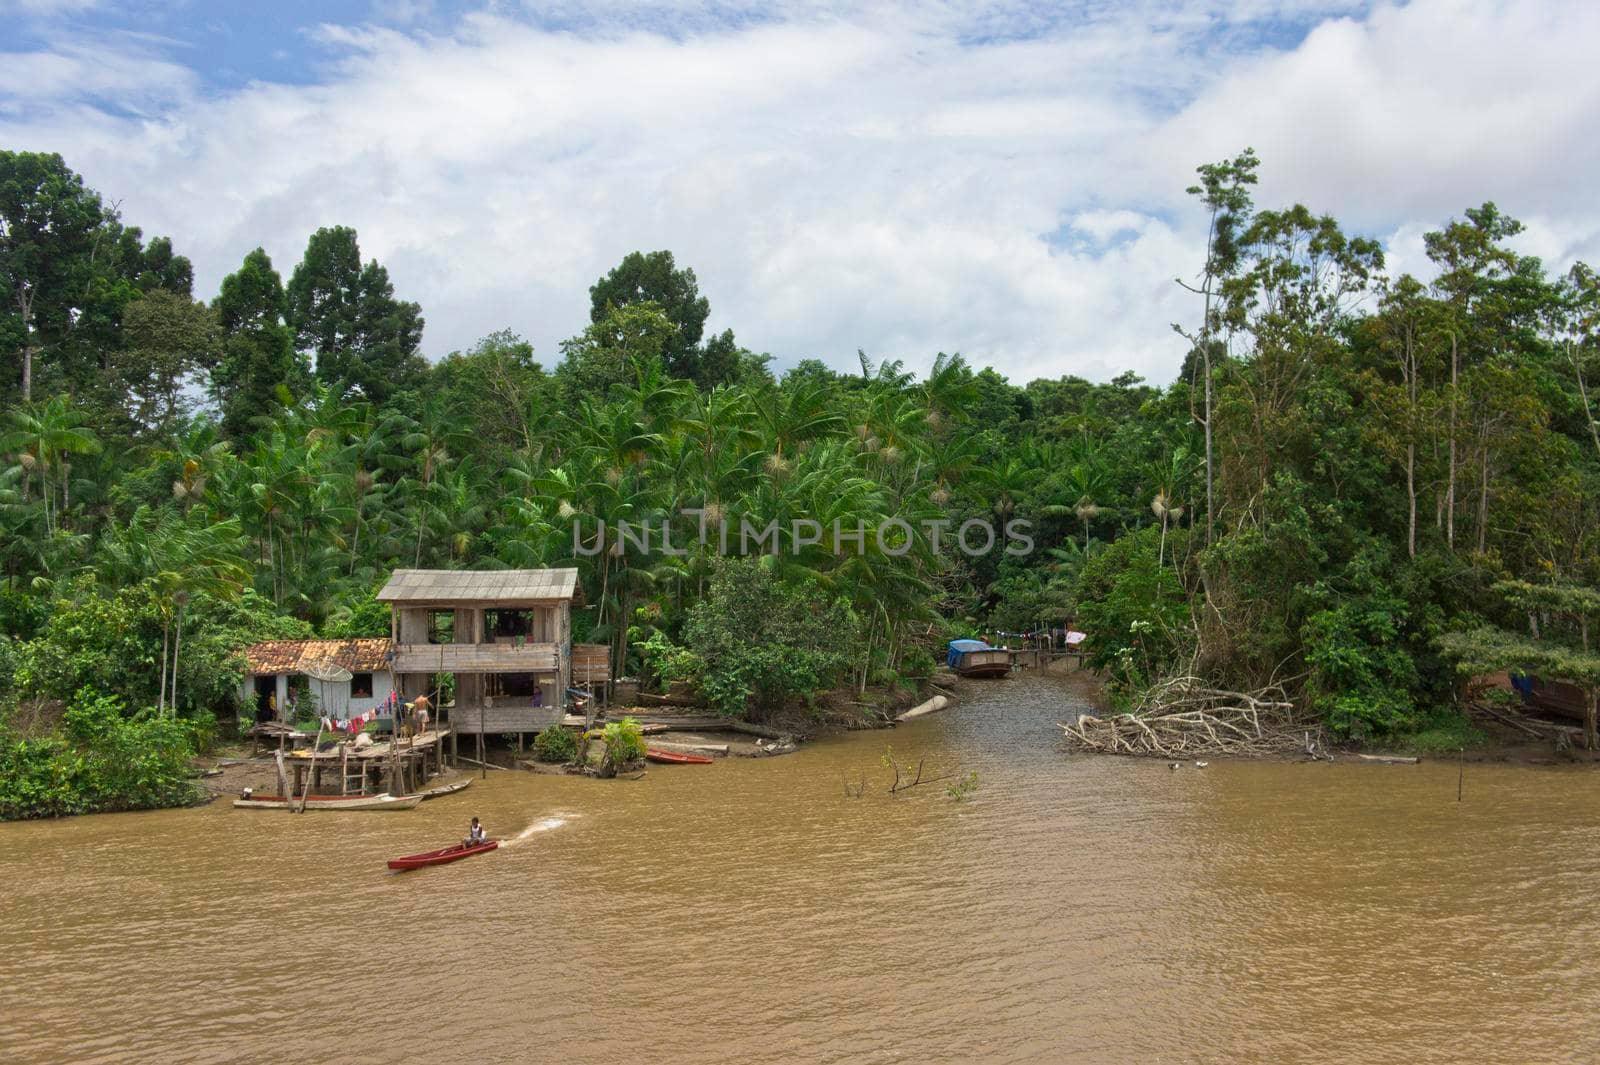 Amazon river view, Indians Village by the river, Brazil, South America